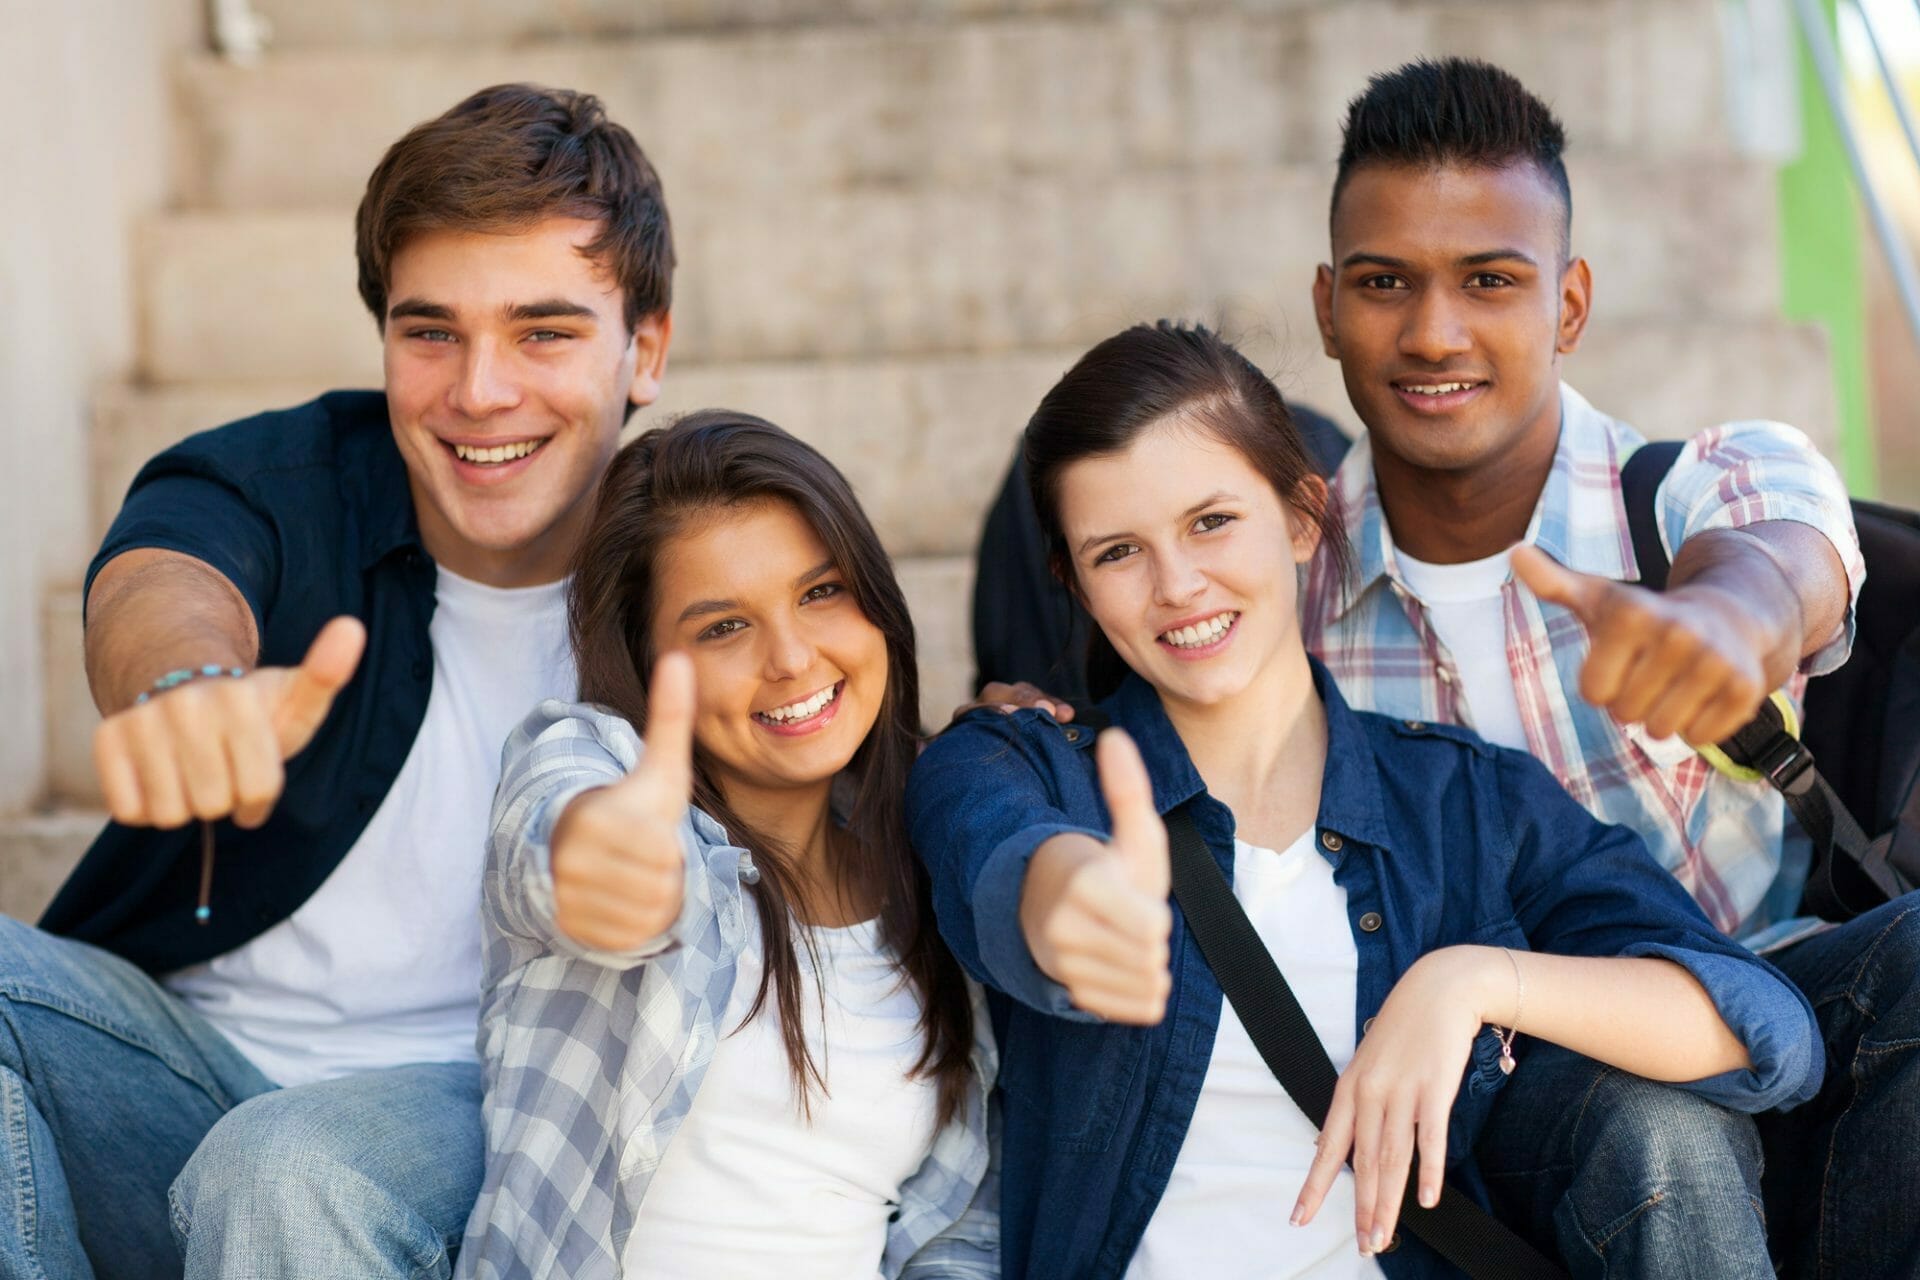 A group of young people giving thumbs up.